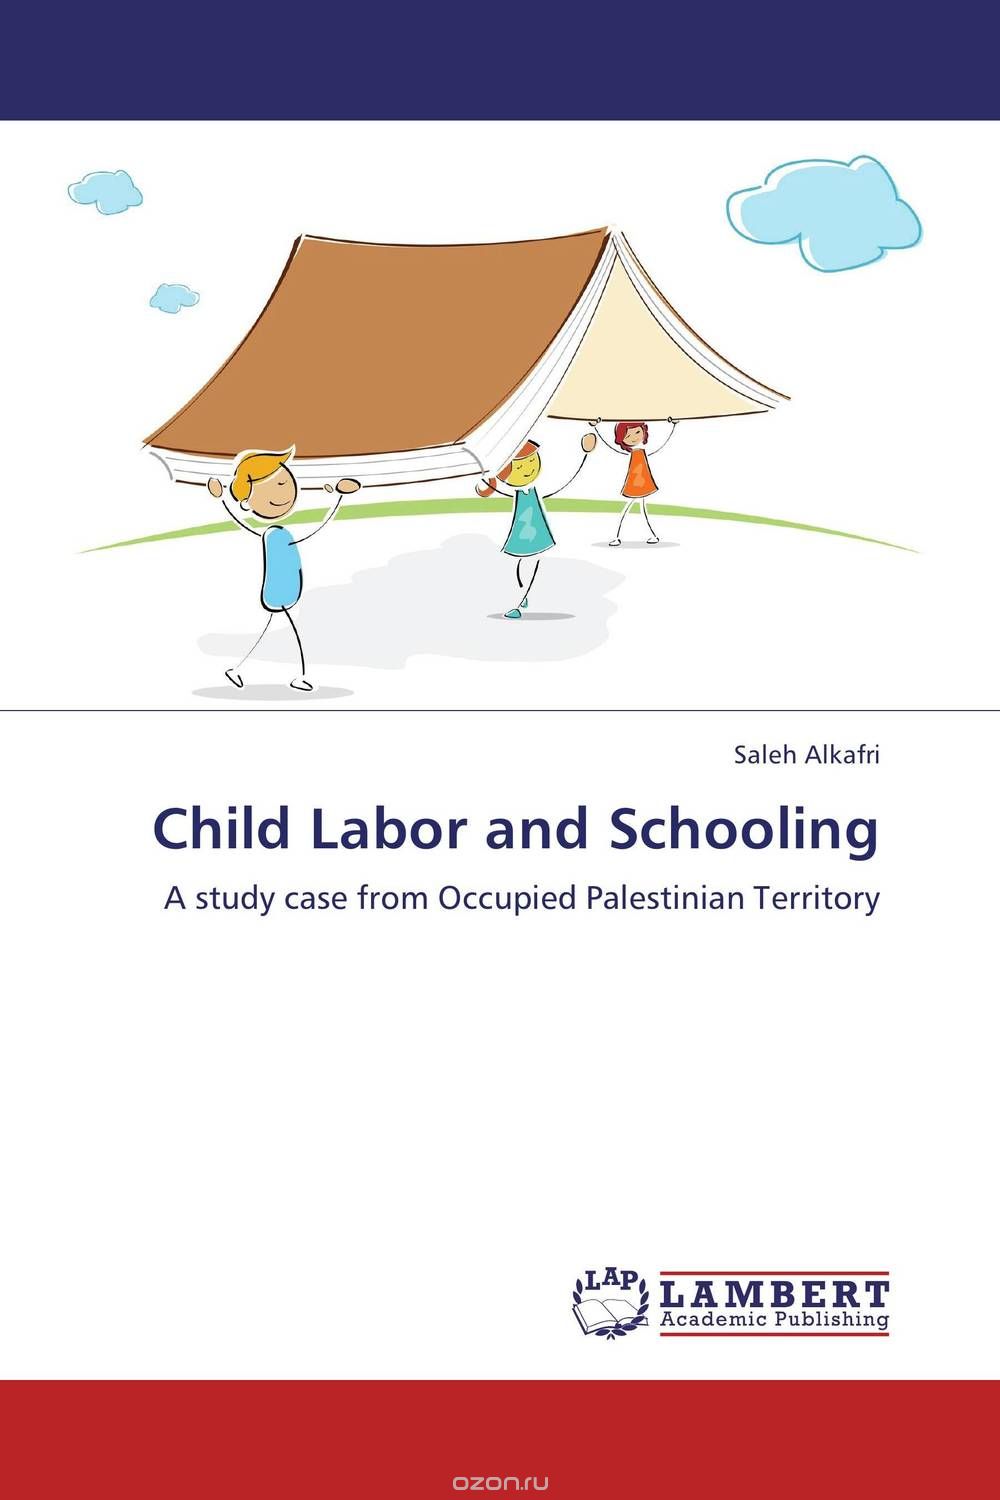 Child Labor and Schooling